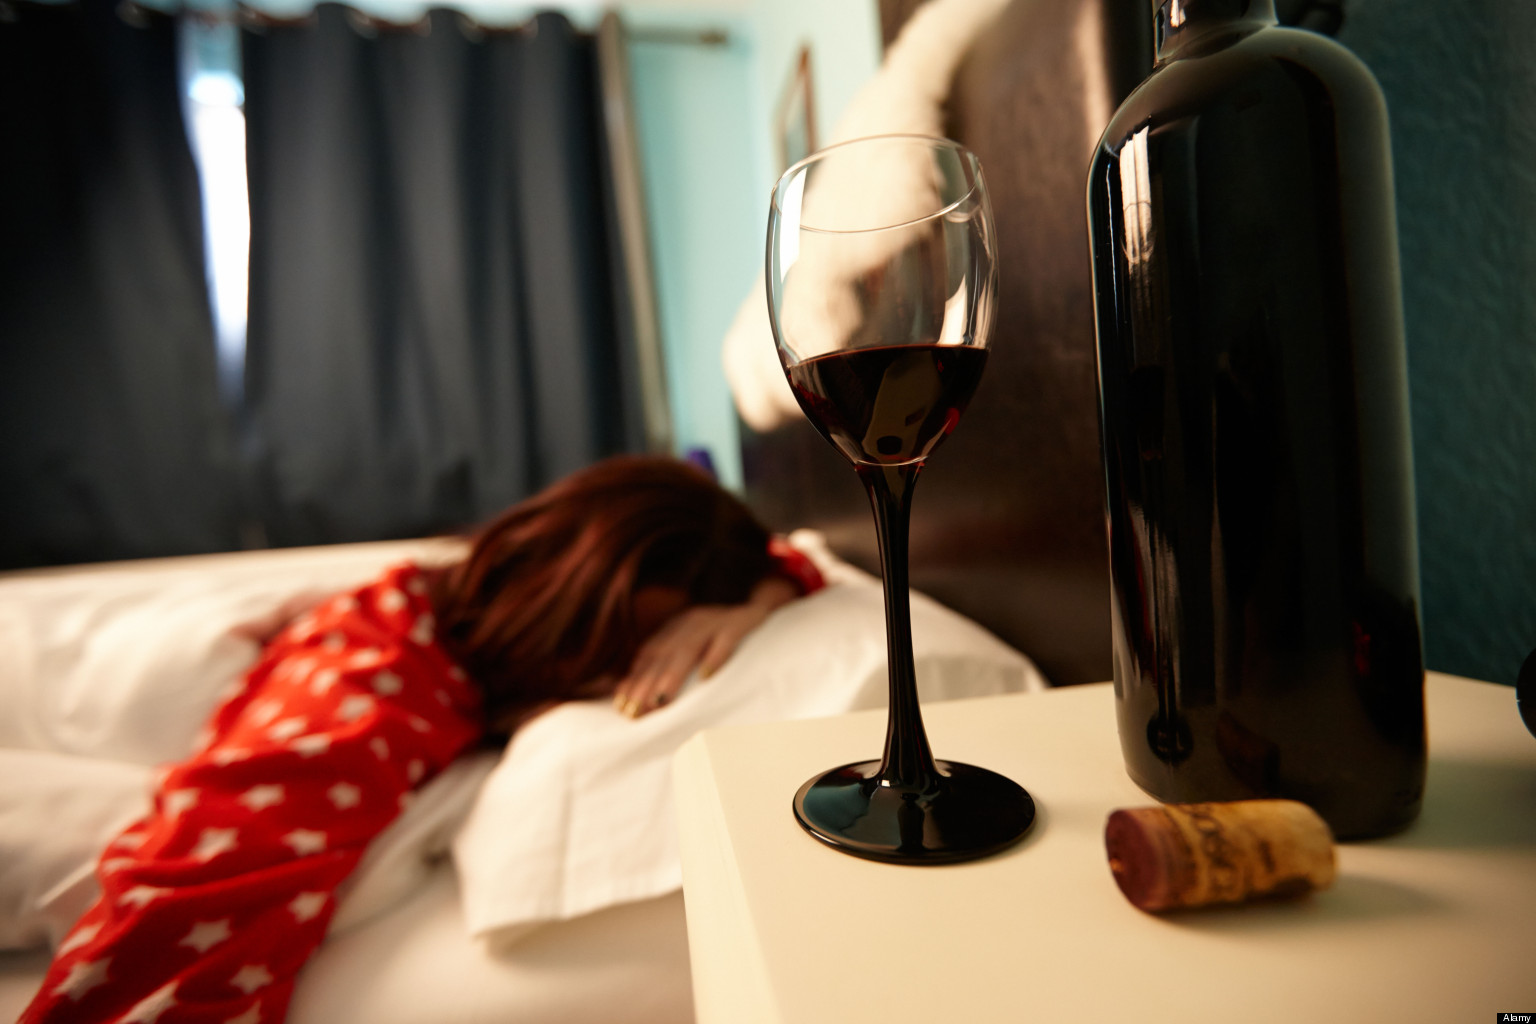 Alcohol and menstrual bleeding. Does alcohol affect menstruation?